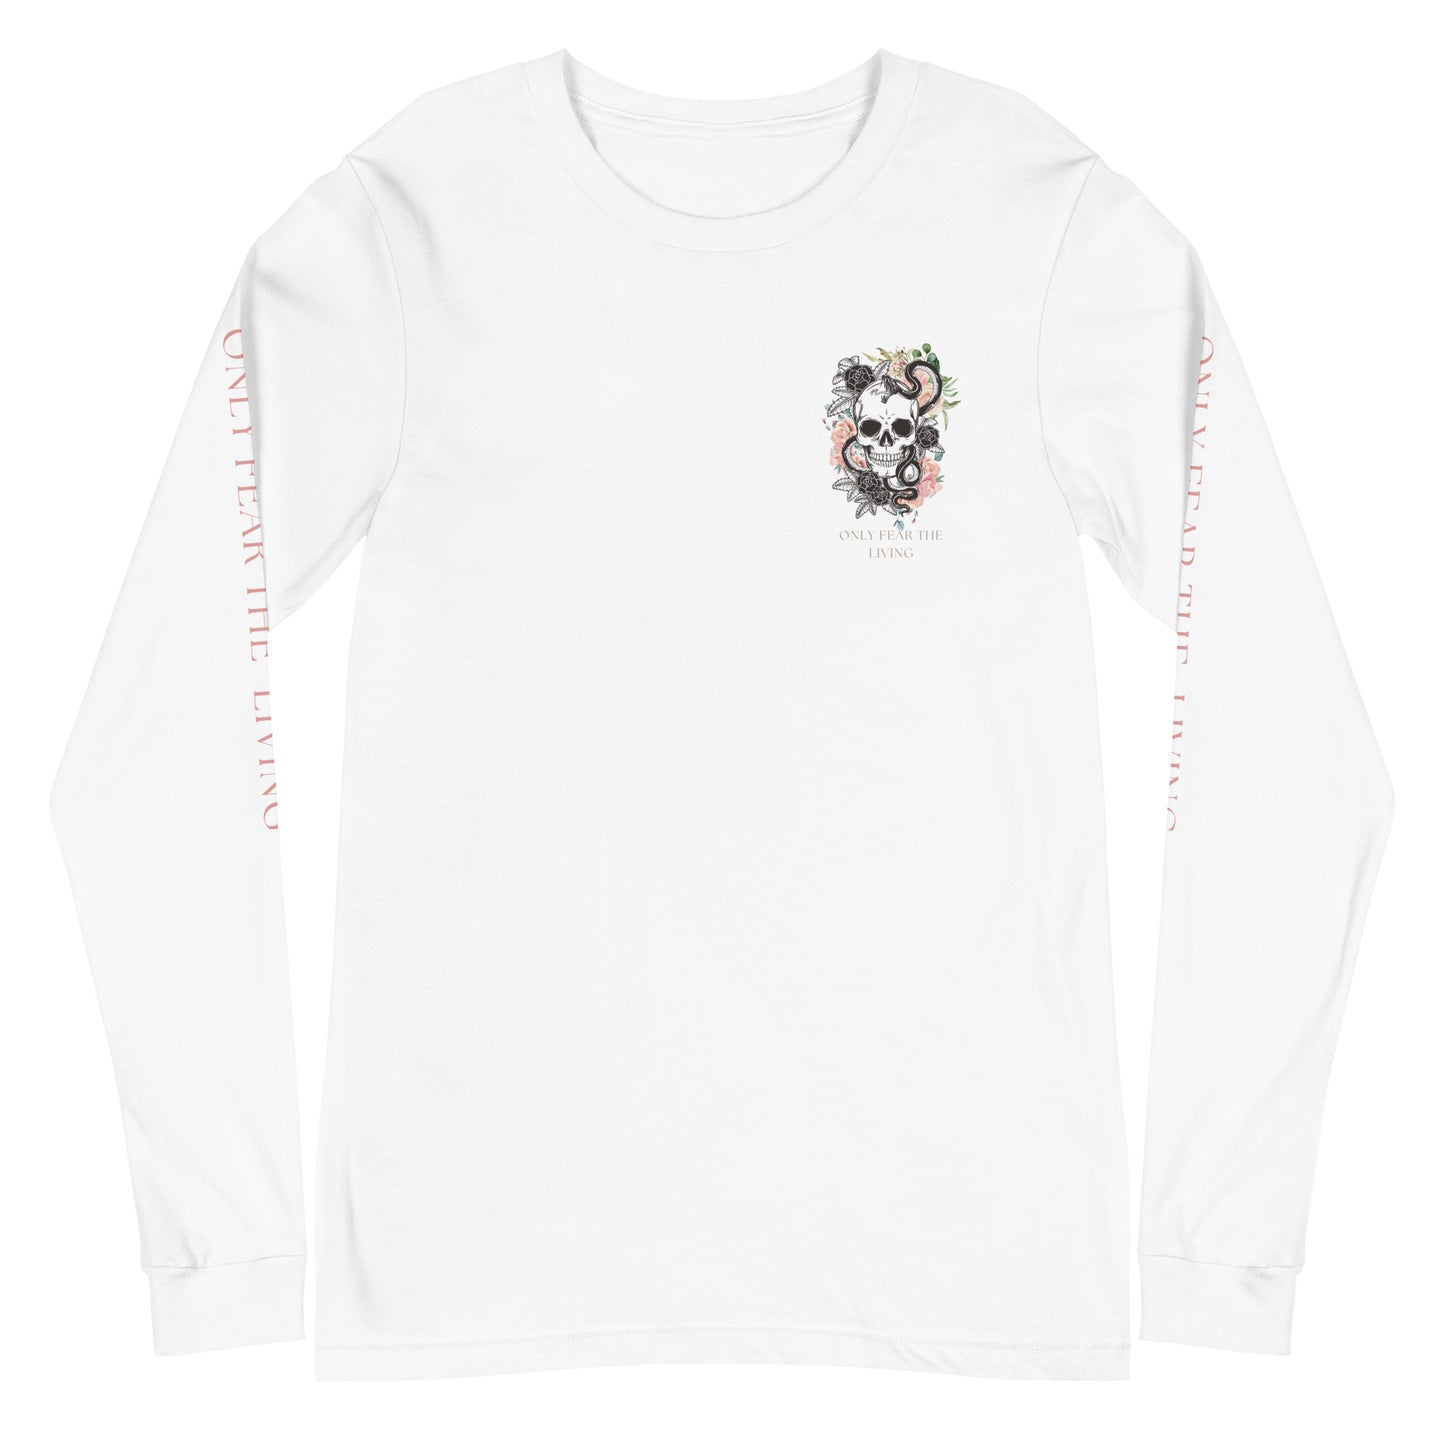 Only Fear the Living Long Sleeve Tee